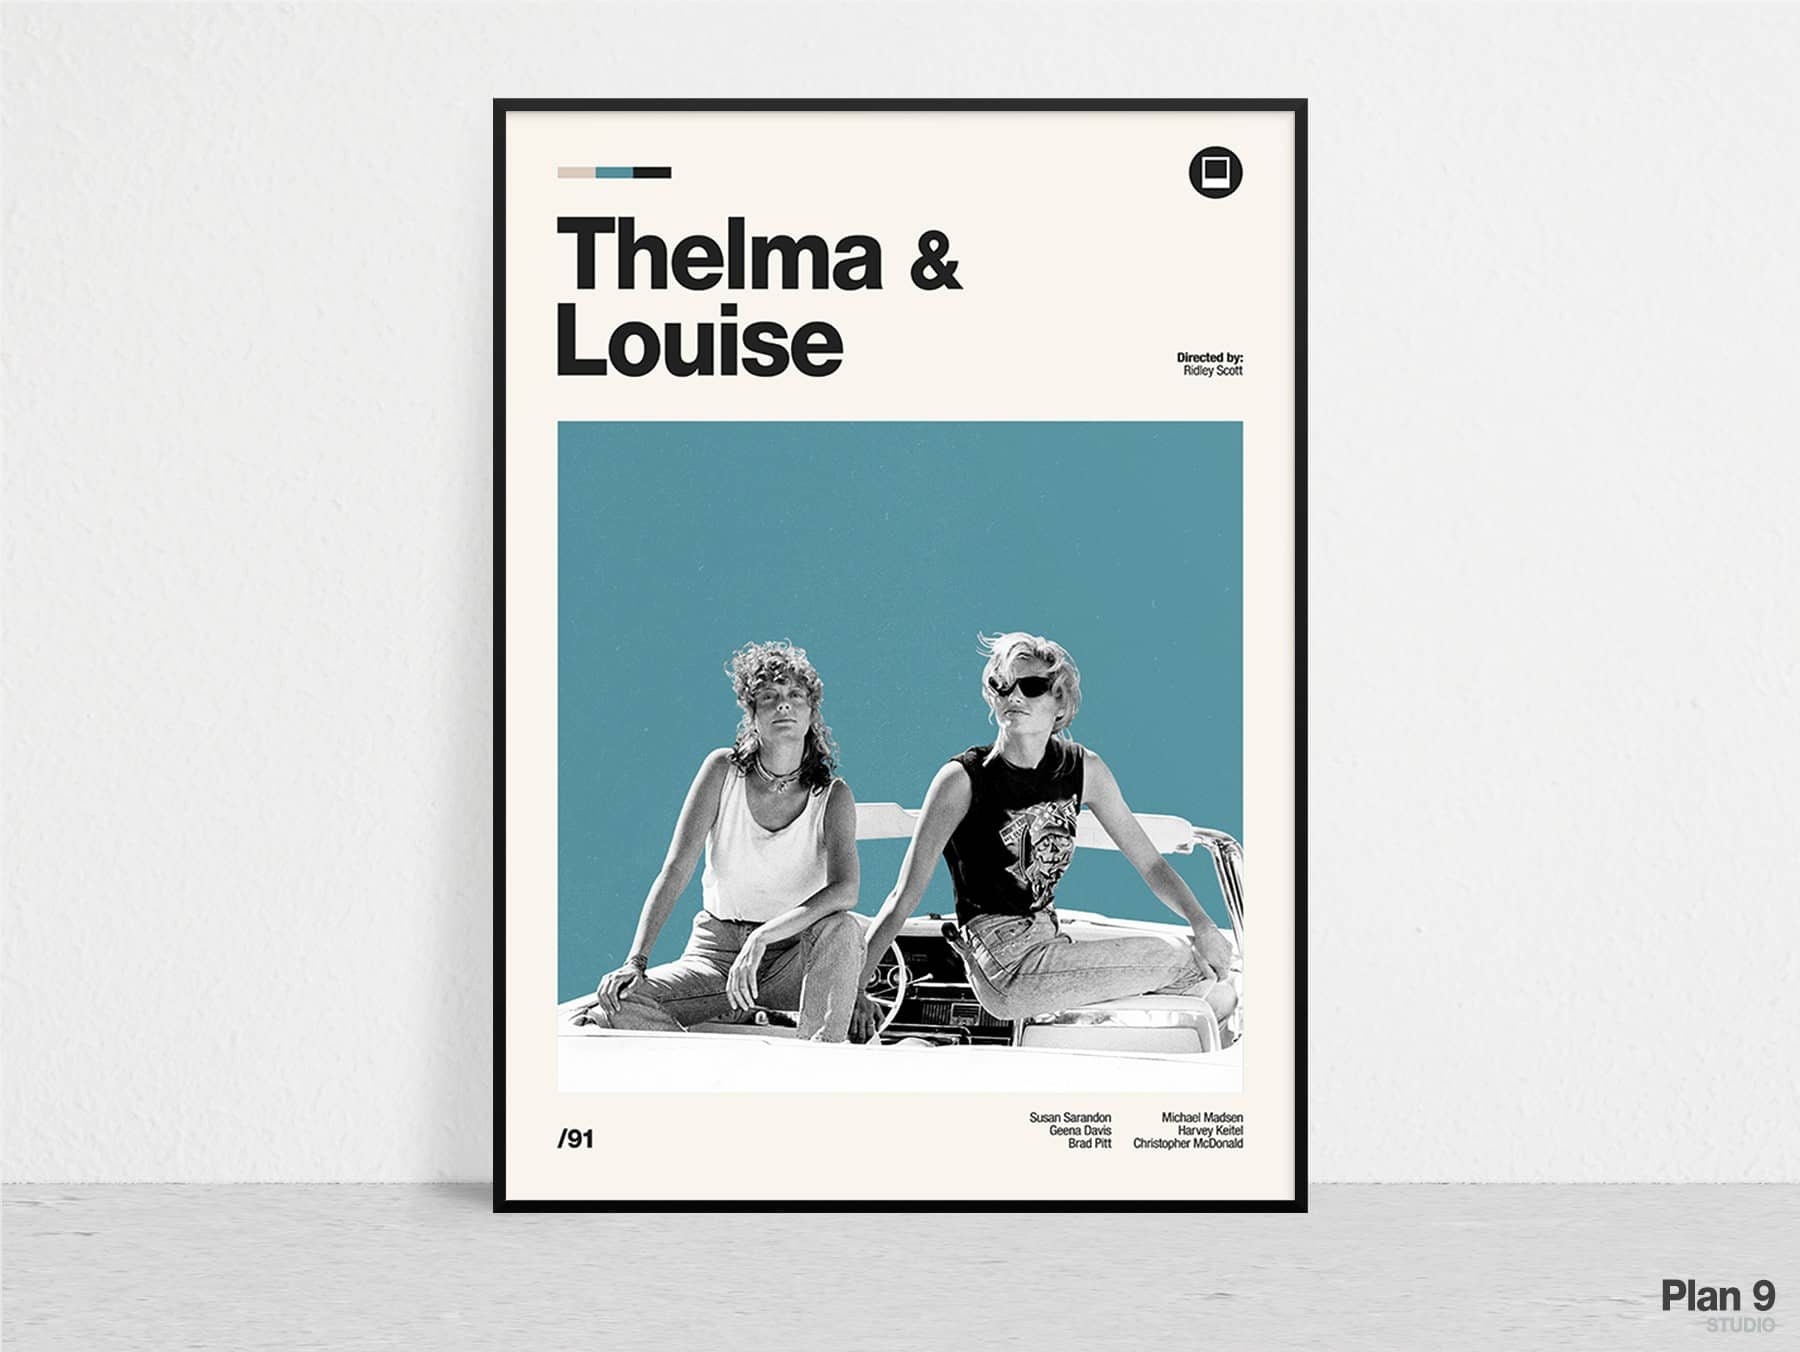  Thelma & Louise Movie Poster 90s American Female Road Film  Artworks Canvas Poster Room Aesthetic Wall Art Prints Home Modern Decor  Gifts Framed-unframed 16x24inch(40x60cm): Posters & Prints